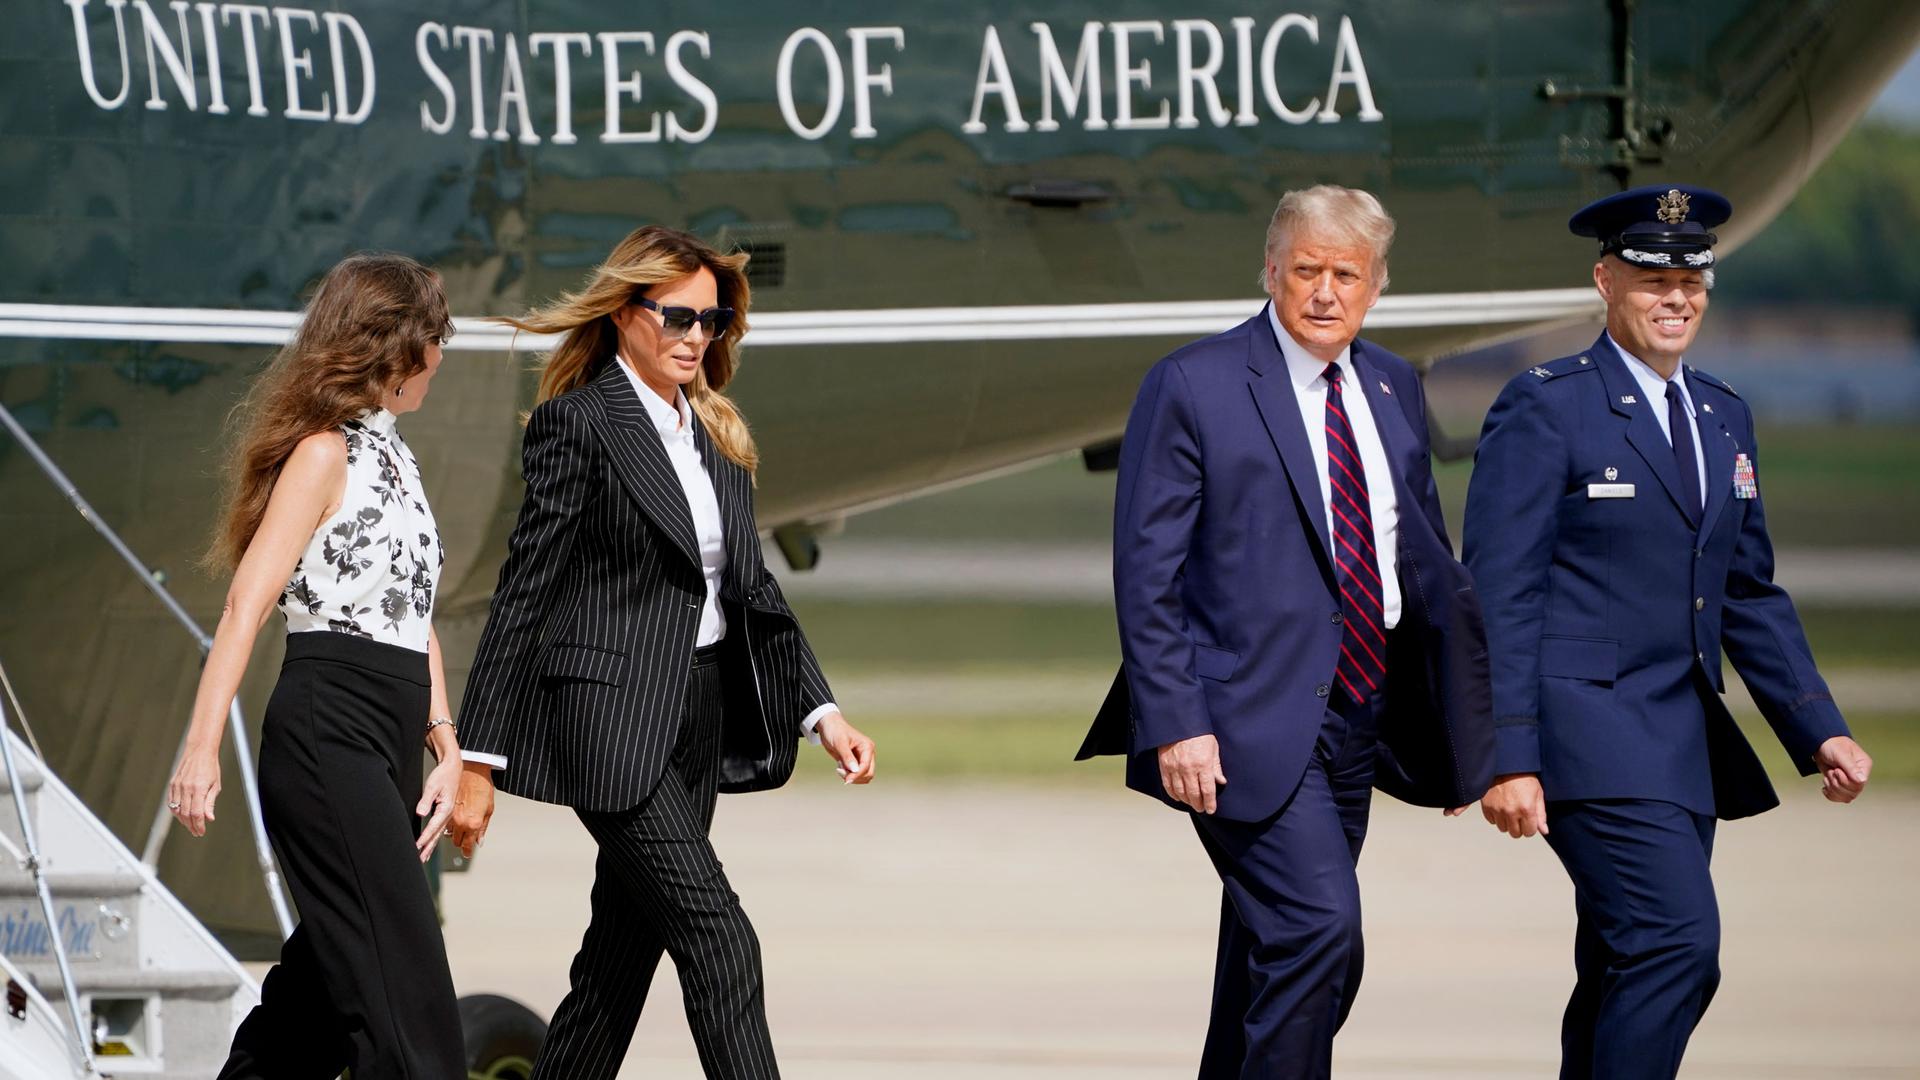 President Donald Trump and first lady Melania Trump walk are shown walking on a airport tarmac with the Marine One helicopter behind them.